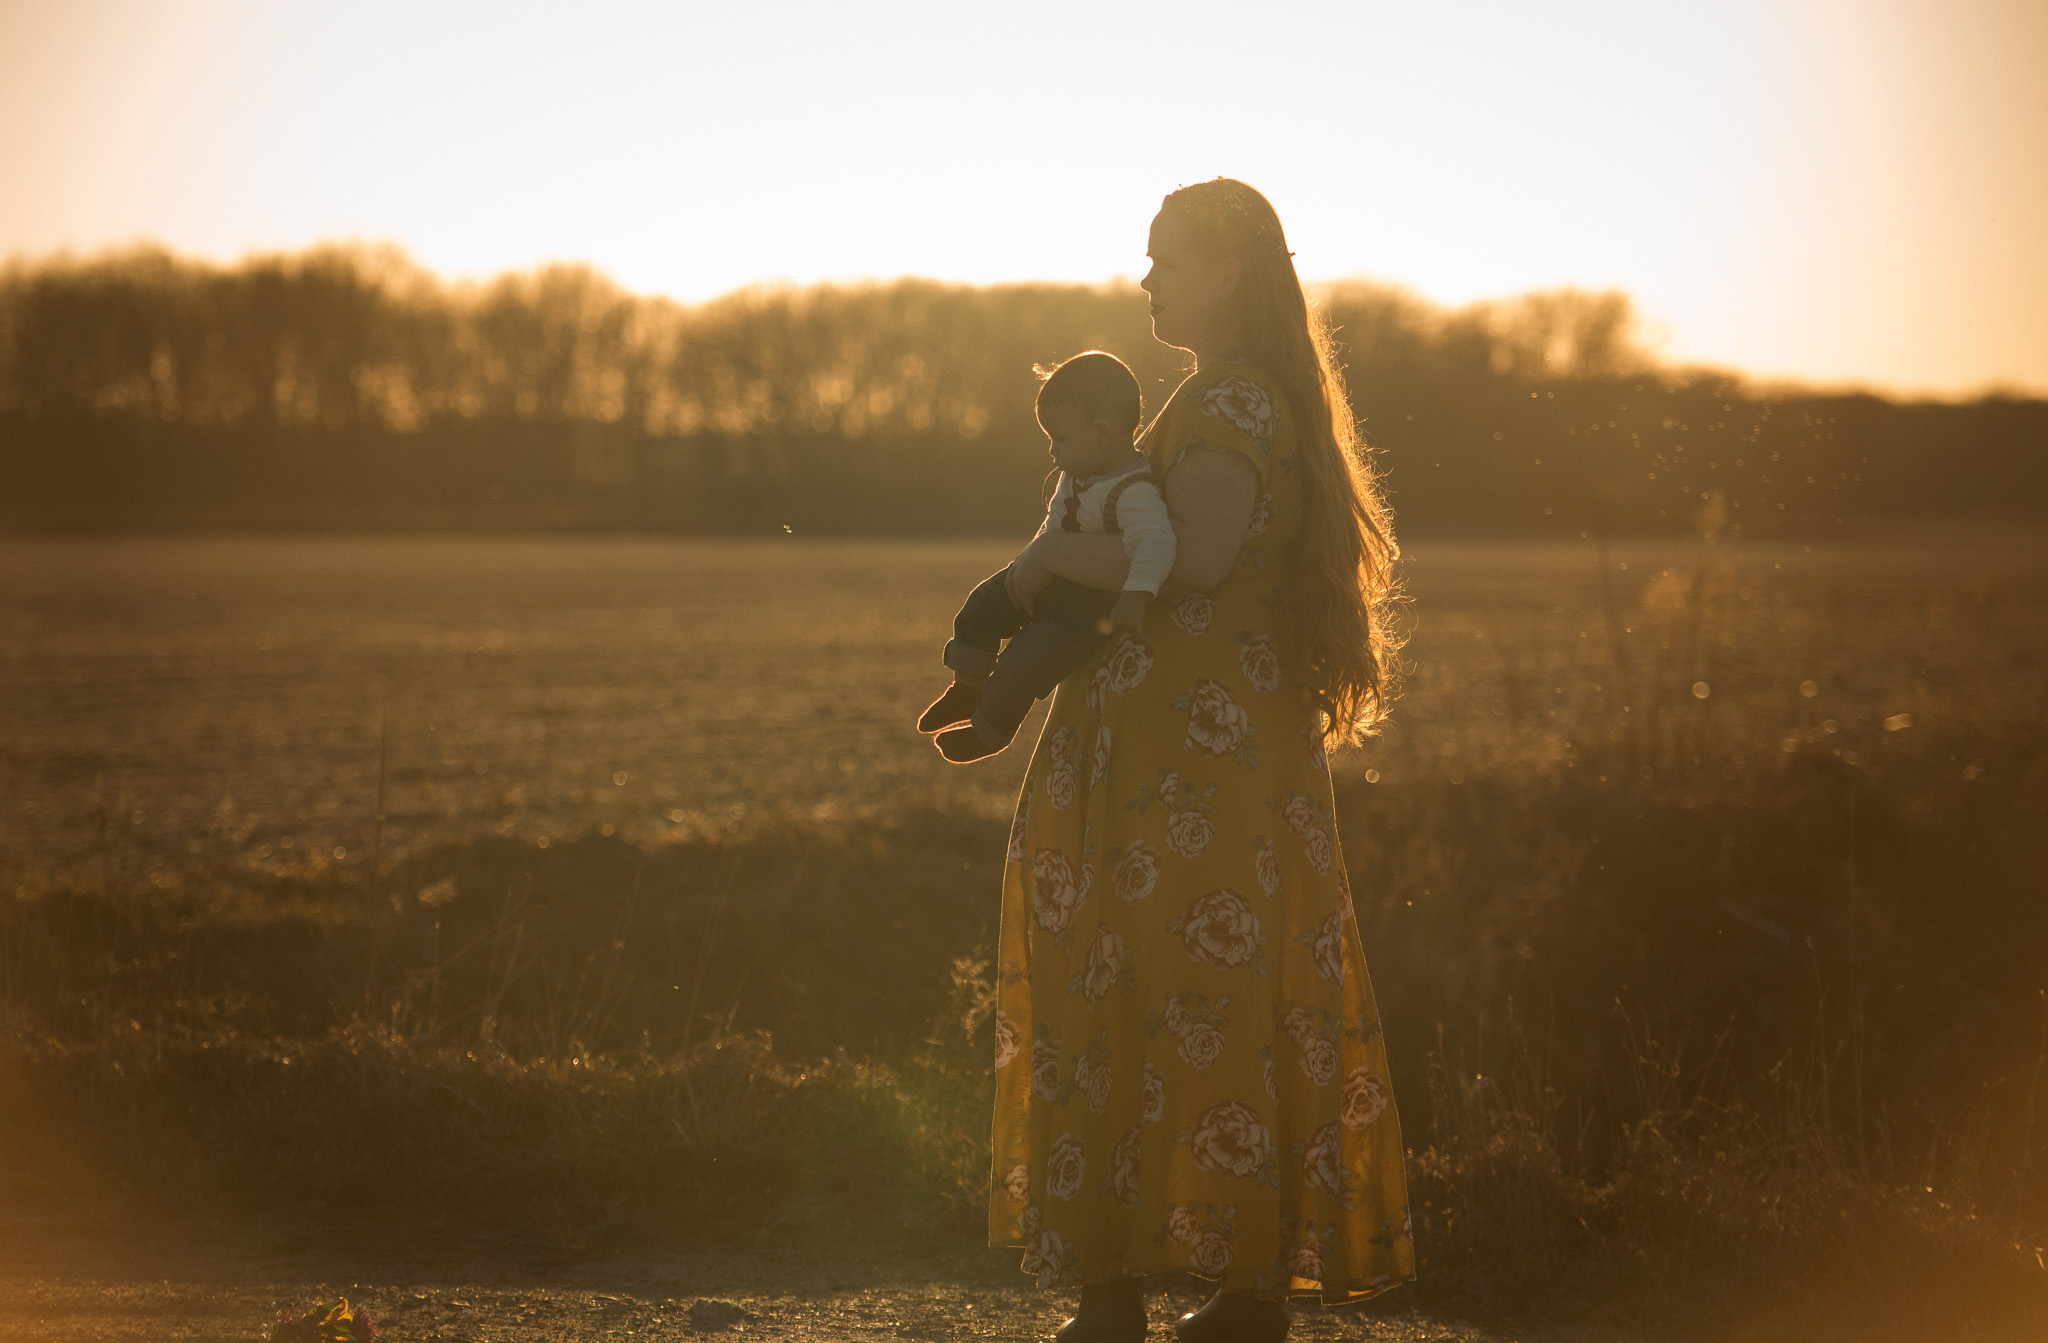 Mother walking in the field carrying her son in the golden sunset